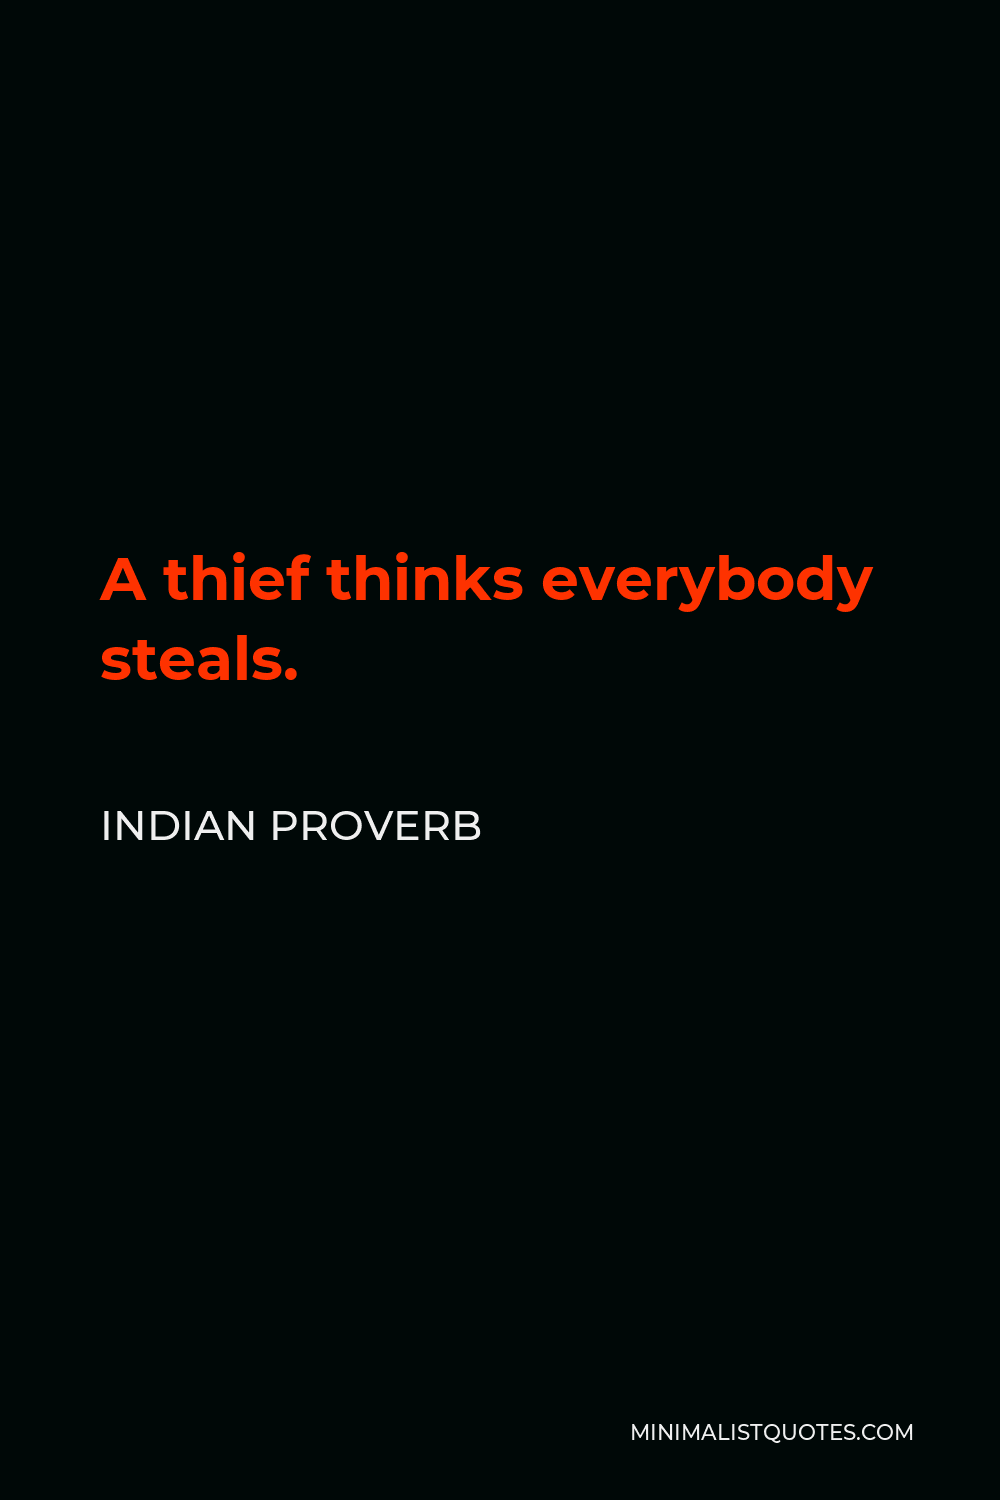 Indian Proverb Quote - A thief thinks everybody steals.